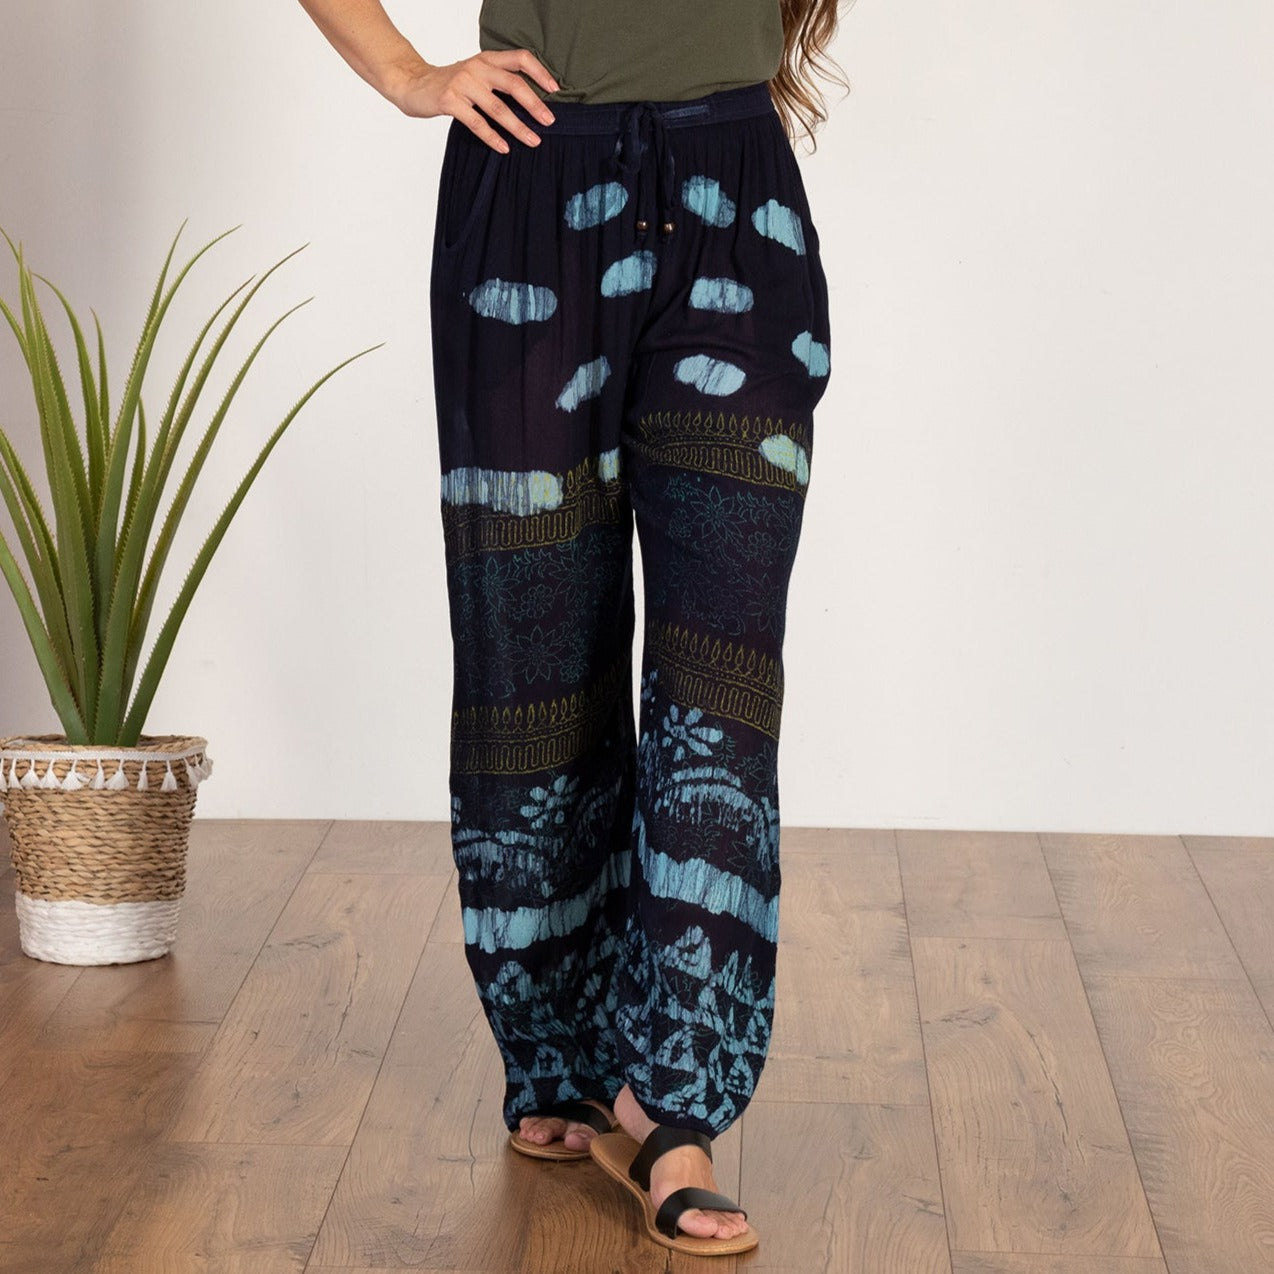 Women's Made To Move Casual Palazzo Pants & Top Set - Pants - Black & Blue - 2X